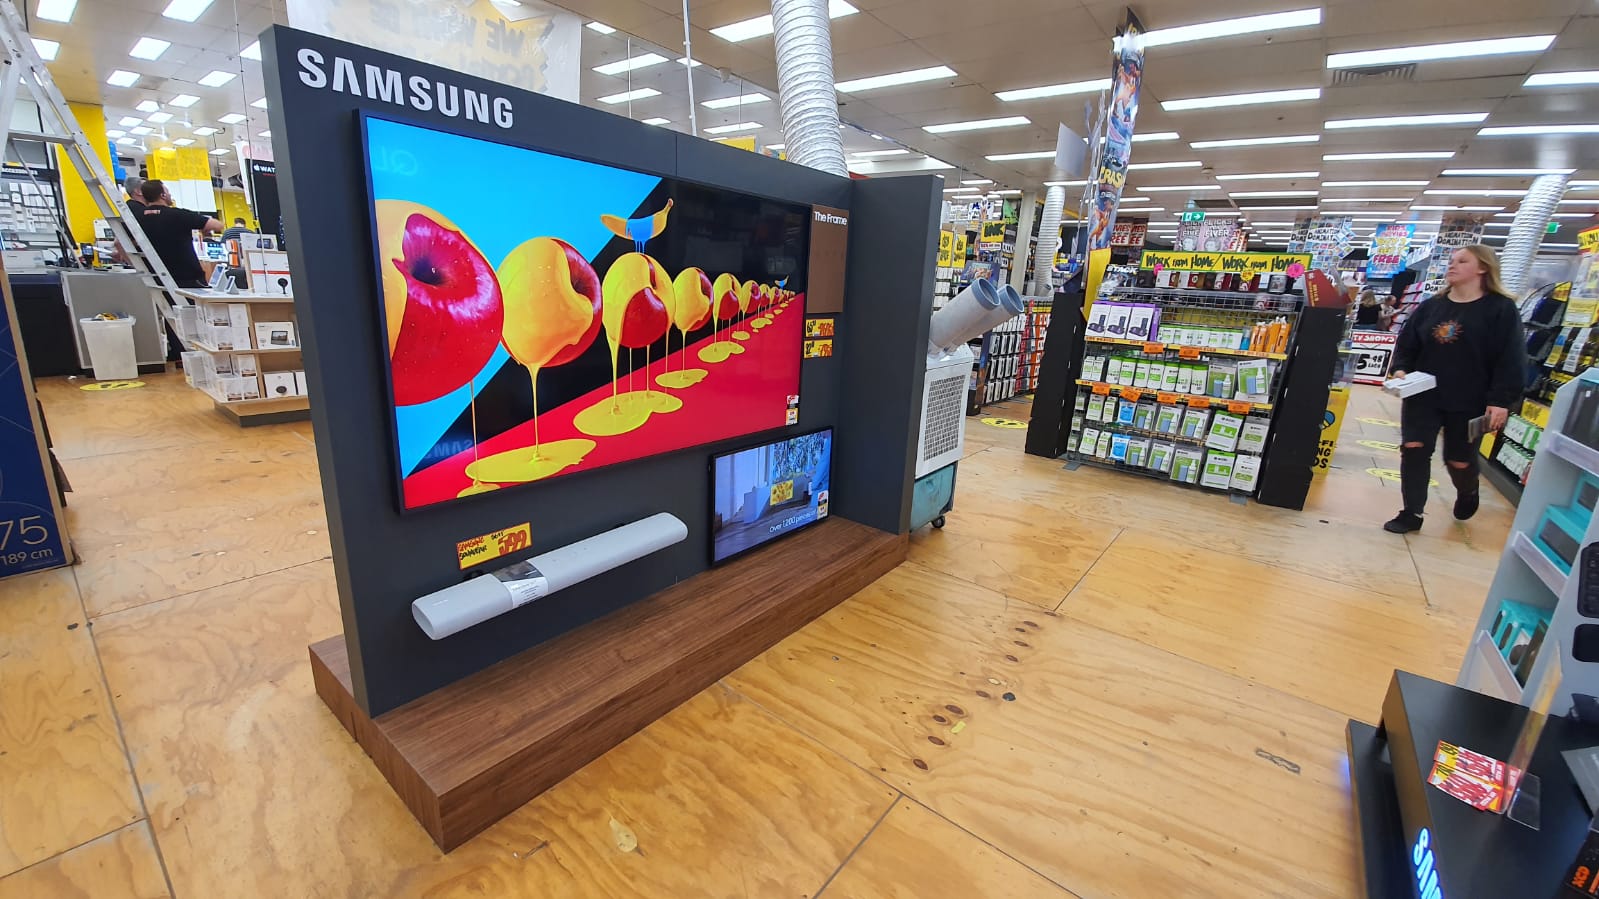 Samsung in-store display for televisions and sound bars